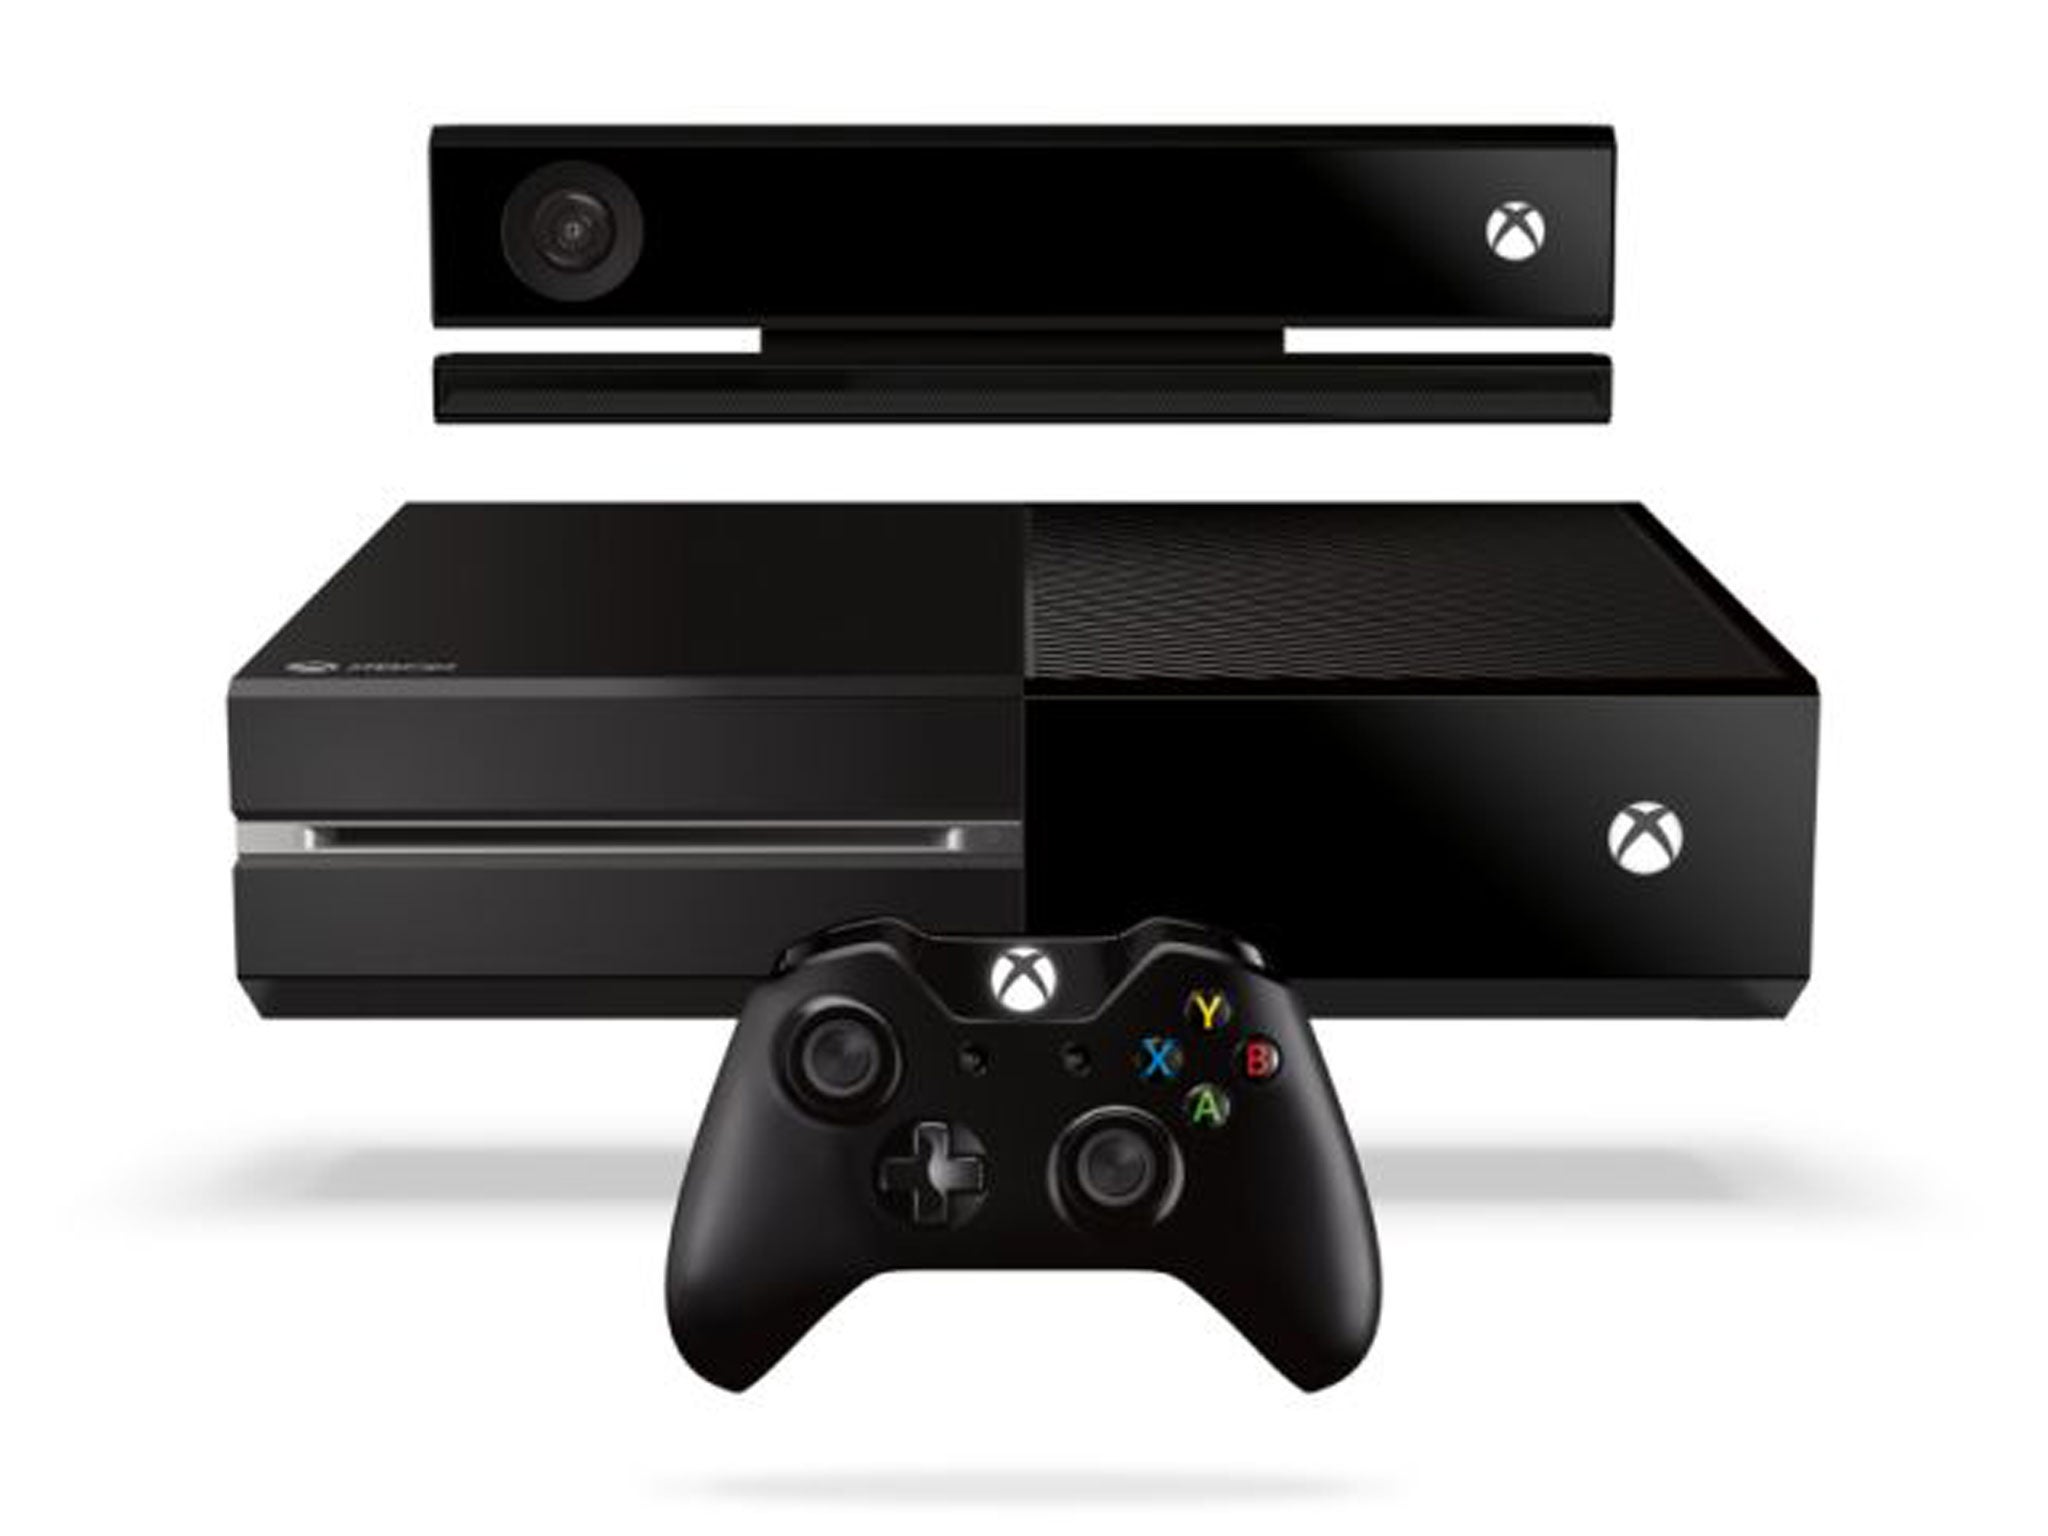 This product image released by Microsoft shows the new Xbox One entertainment console that will go on sale later this year. Microsoft says more games will be shown at next month's E3 video game conference in Los Angeles